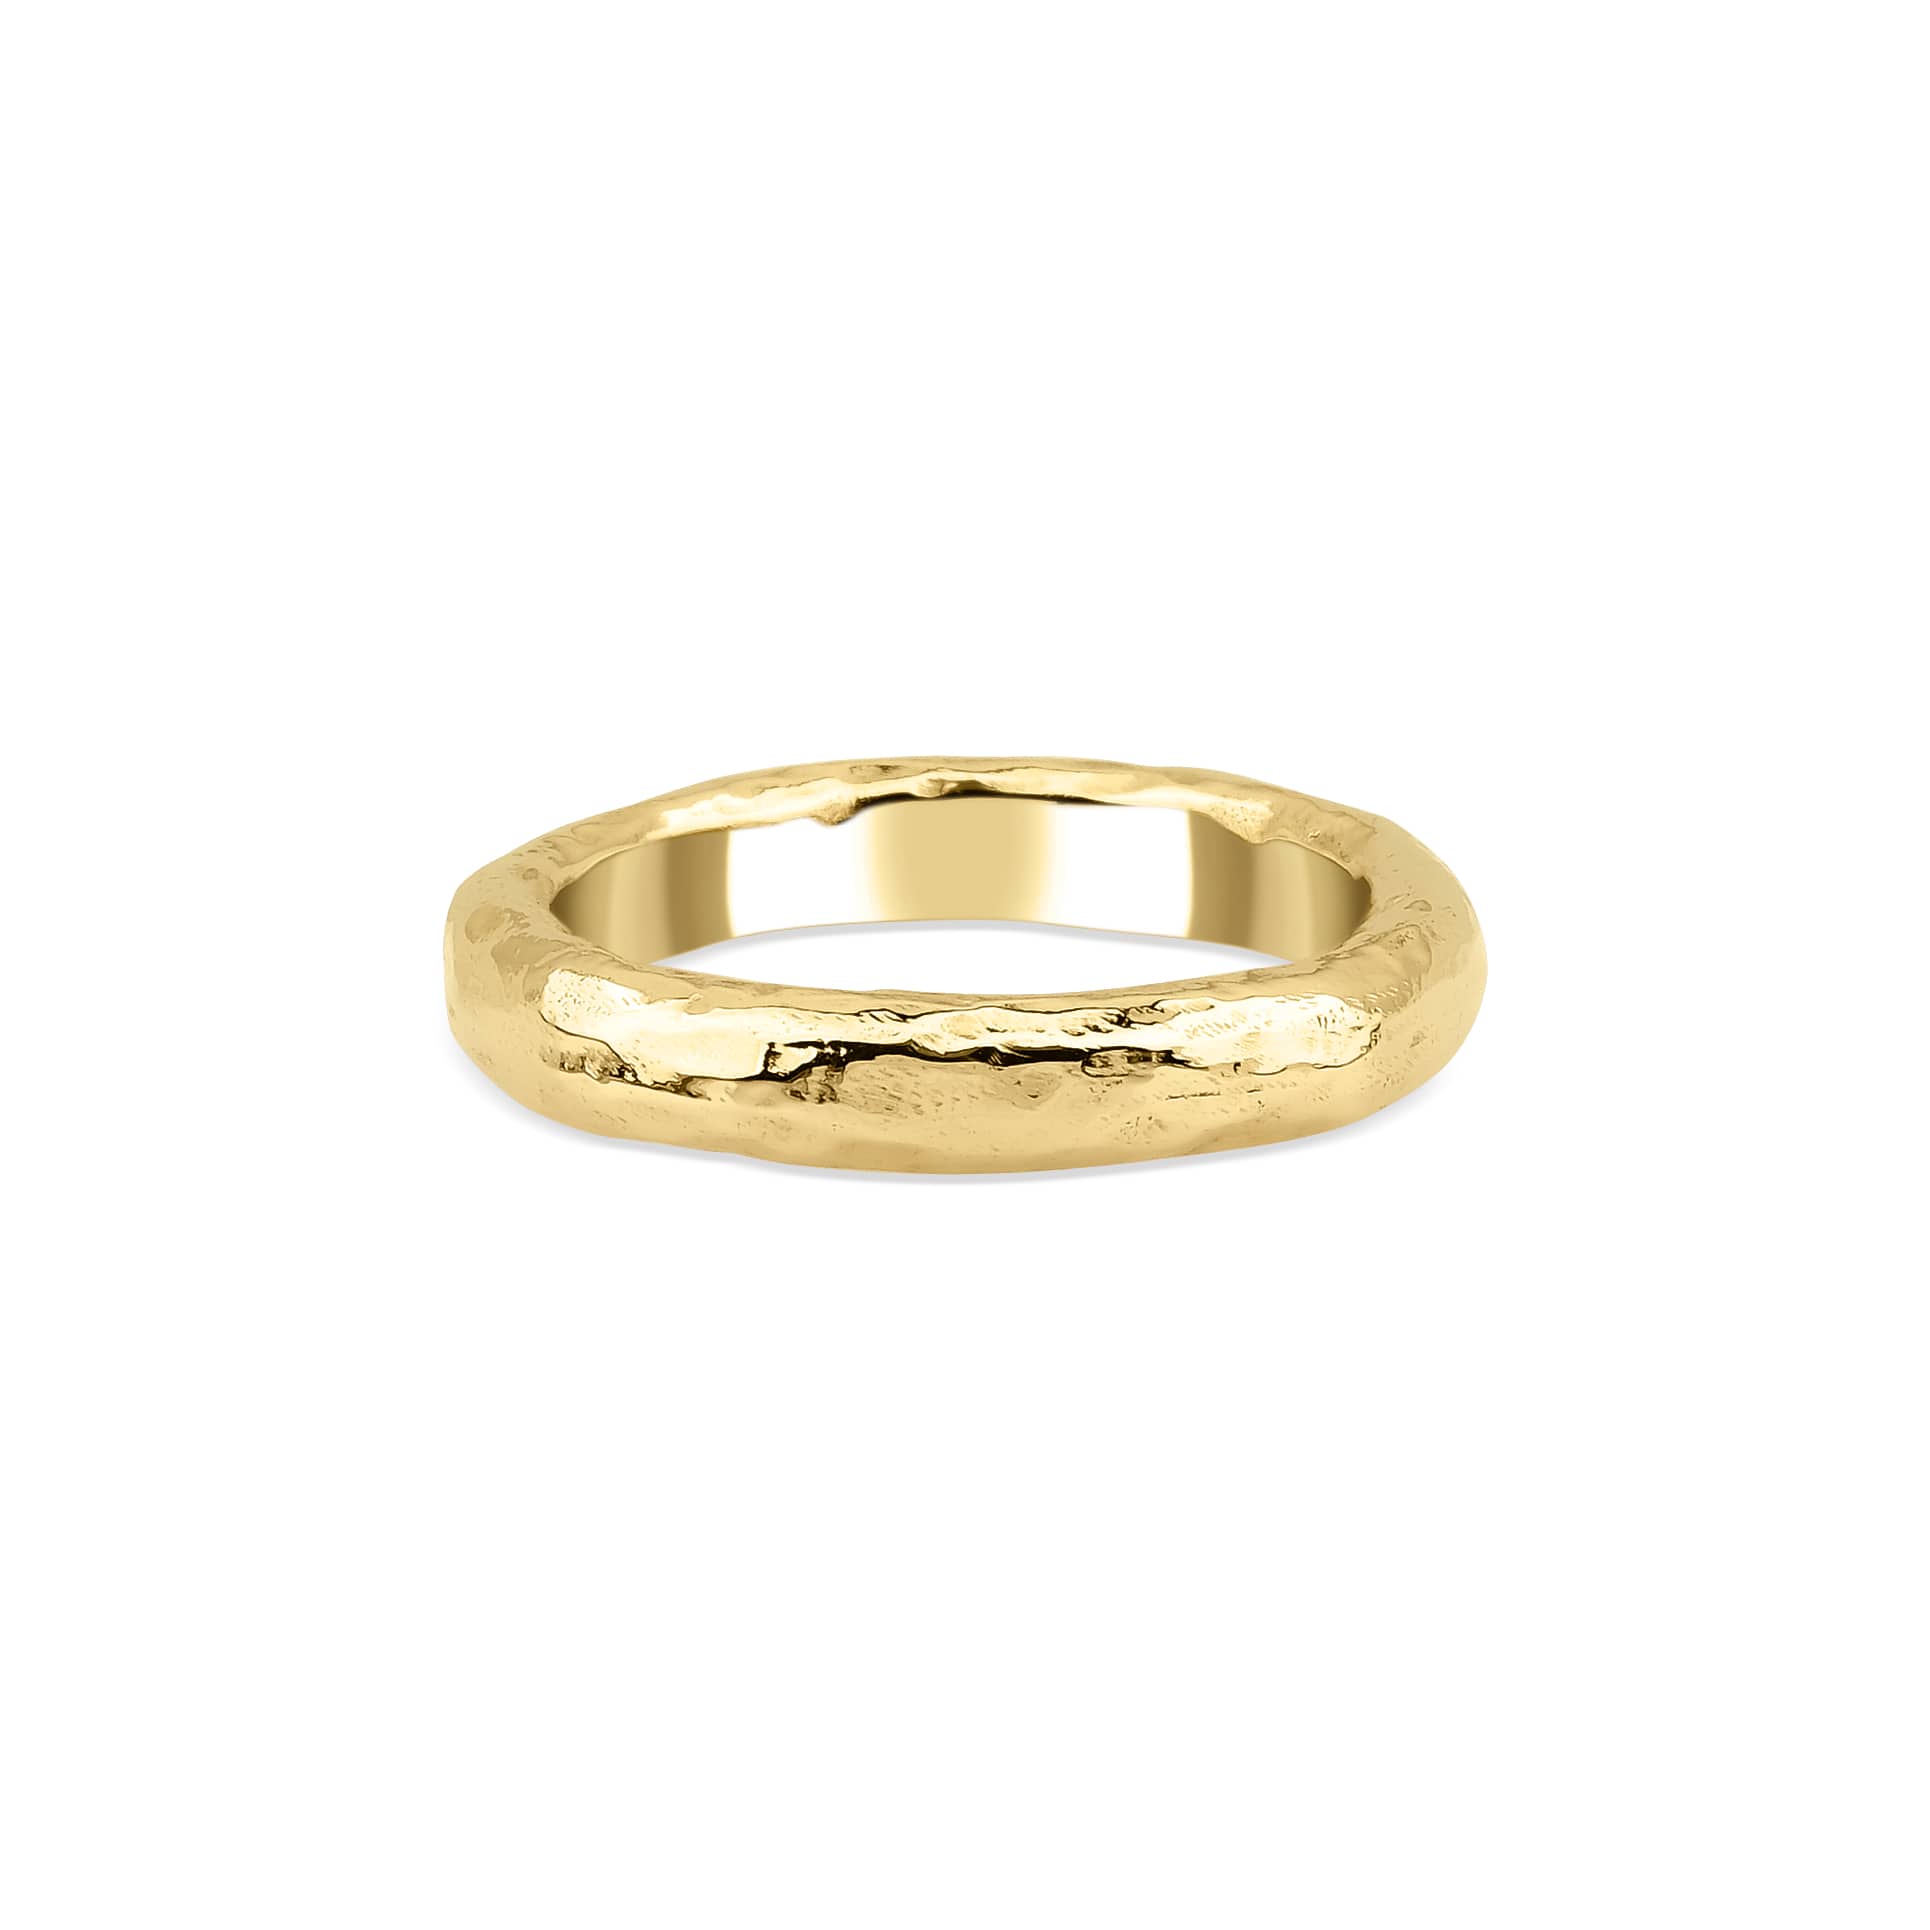 Handmade Solid Gold Engagement Ring